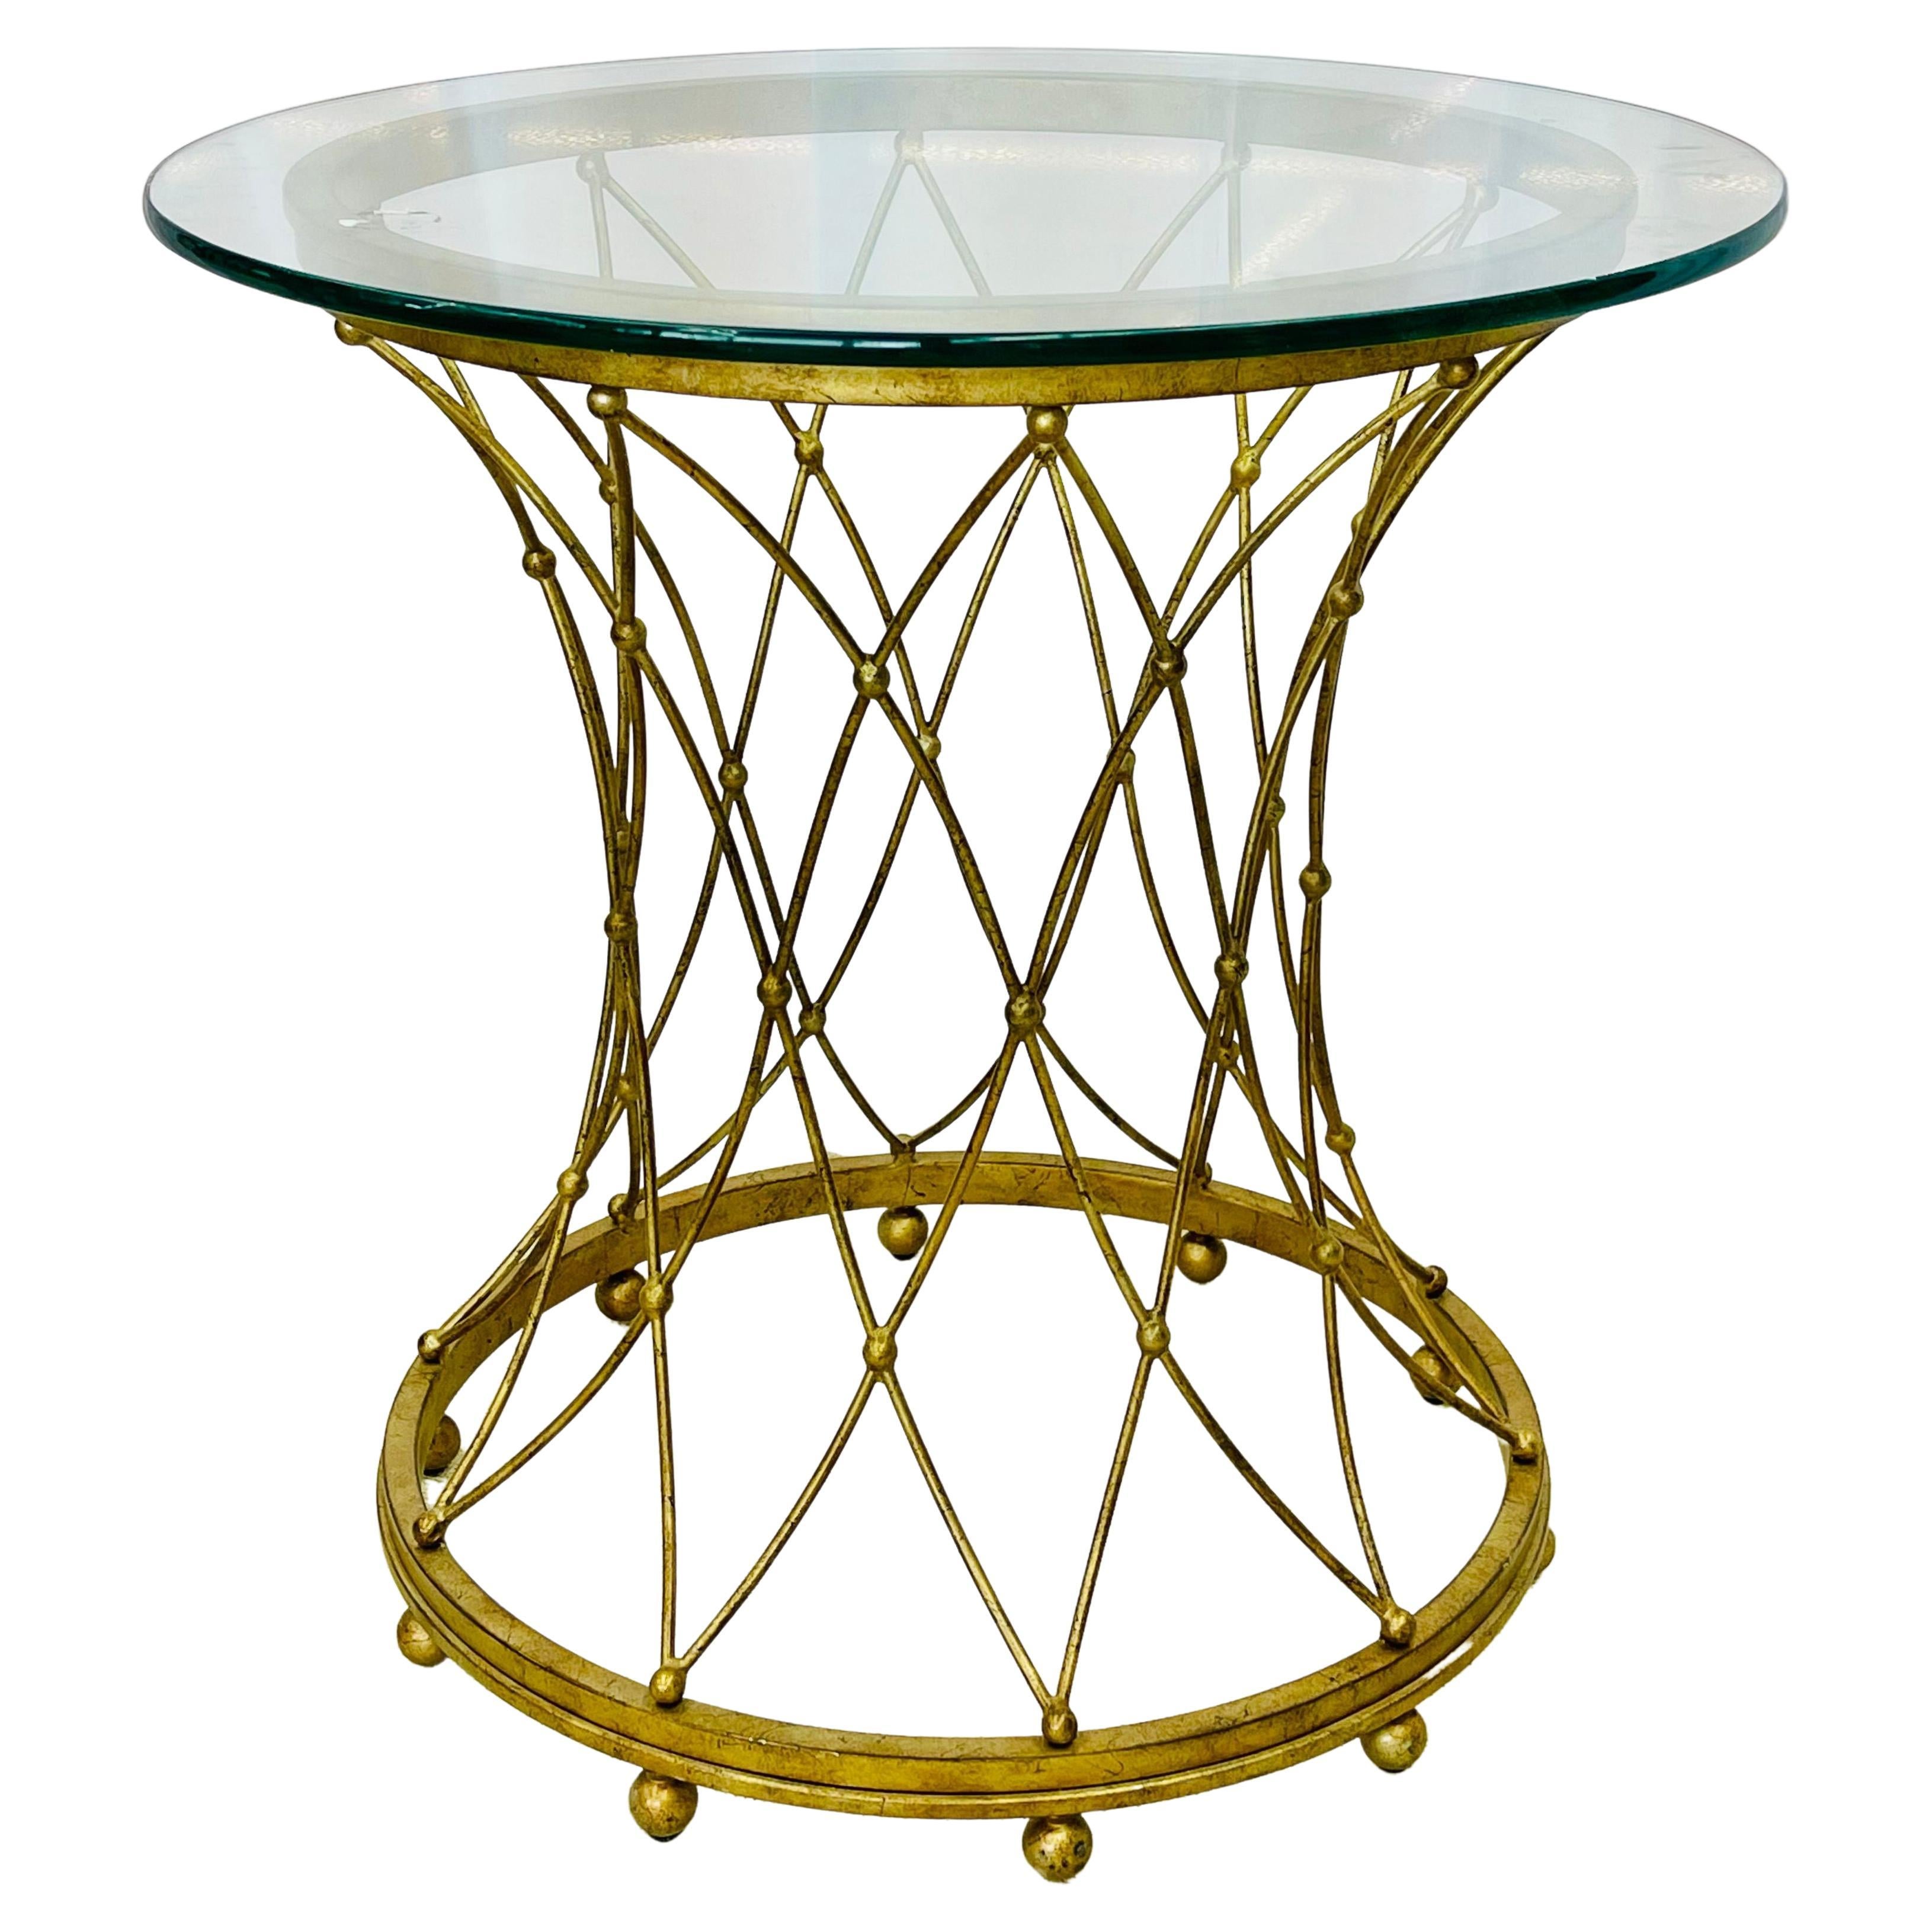 Neoclassical, Maison Jansen Style Round Gilt Metal Coffee Table, Side Table For Sale